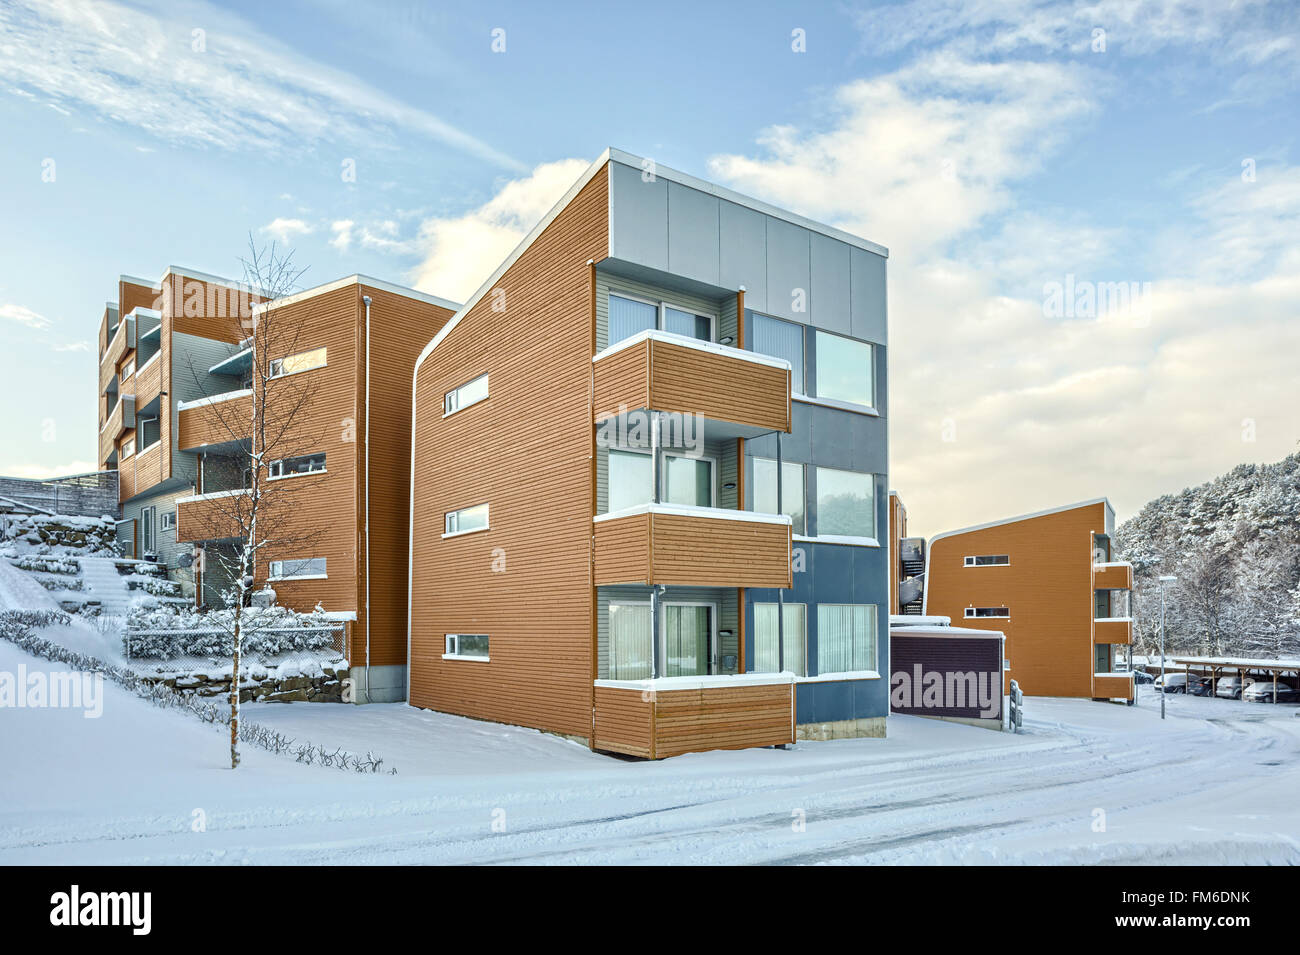 An exterior view of low rise residential housing, in Sandes. With snow on the ground. Stock Photo